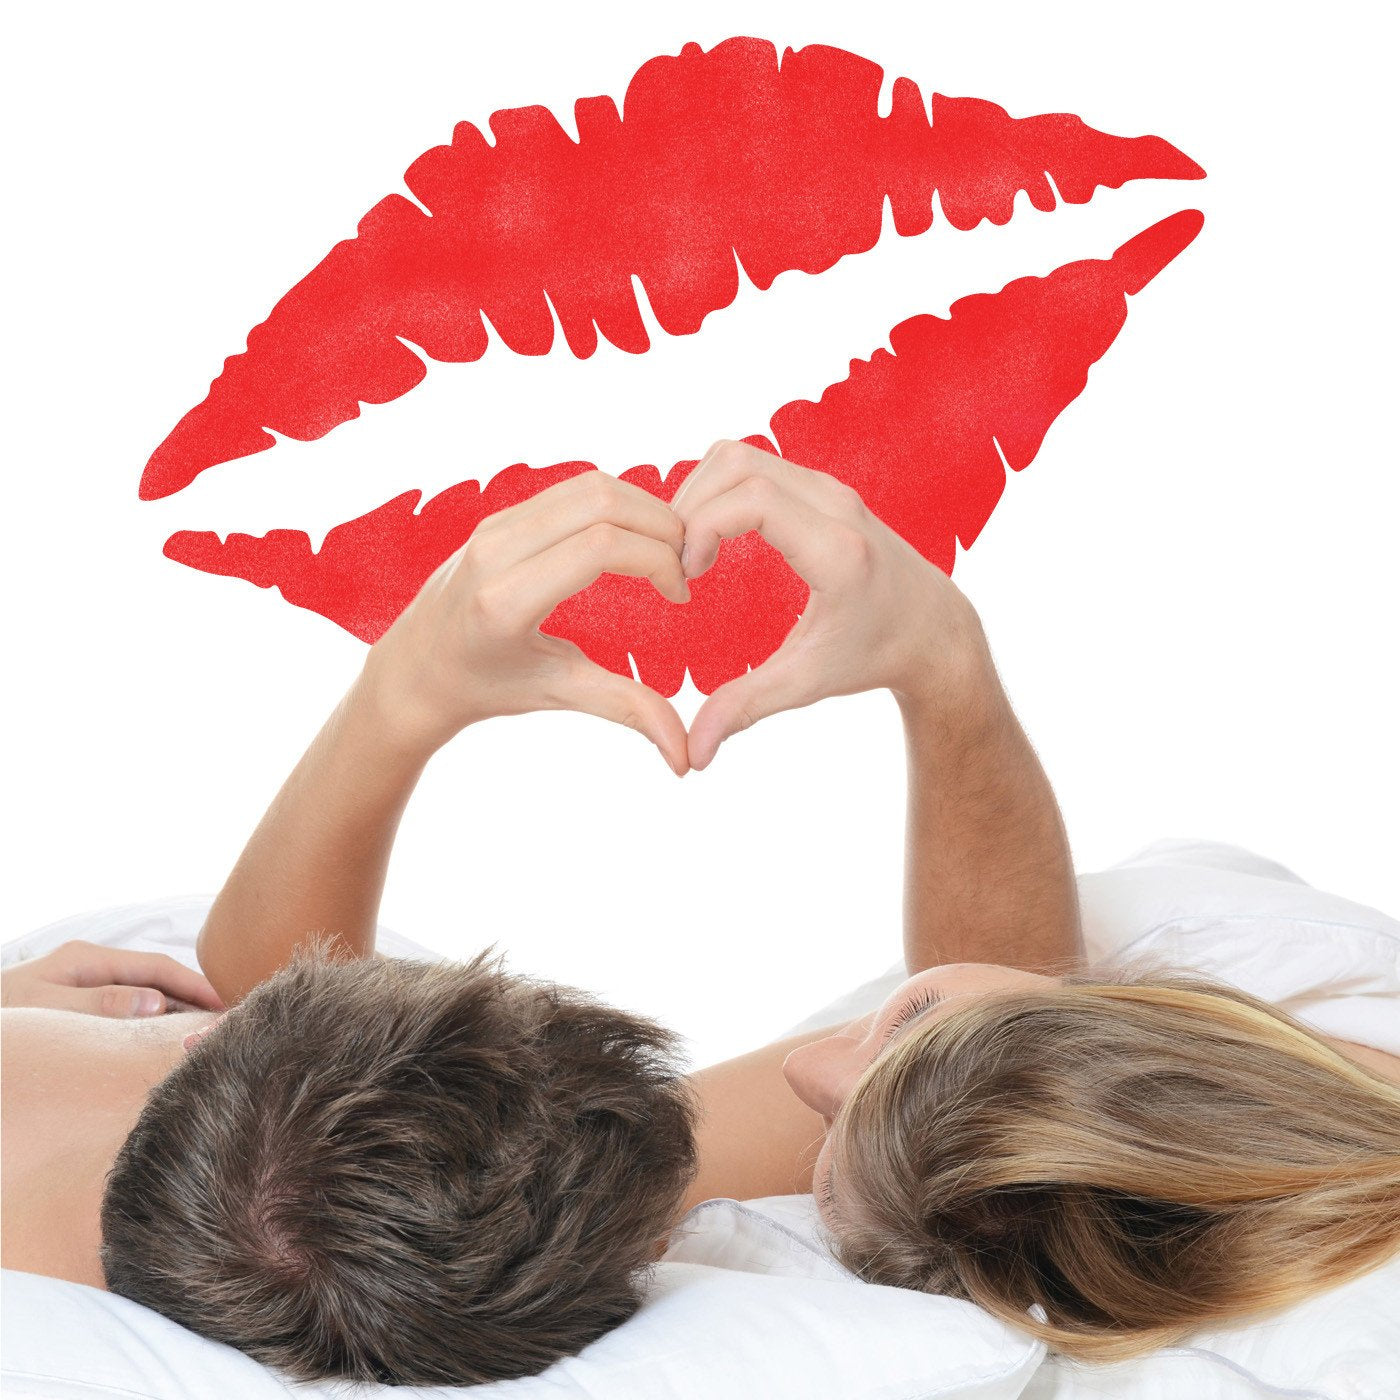 Lip Print Wall Stencil for Couples